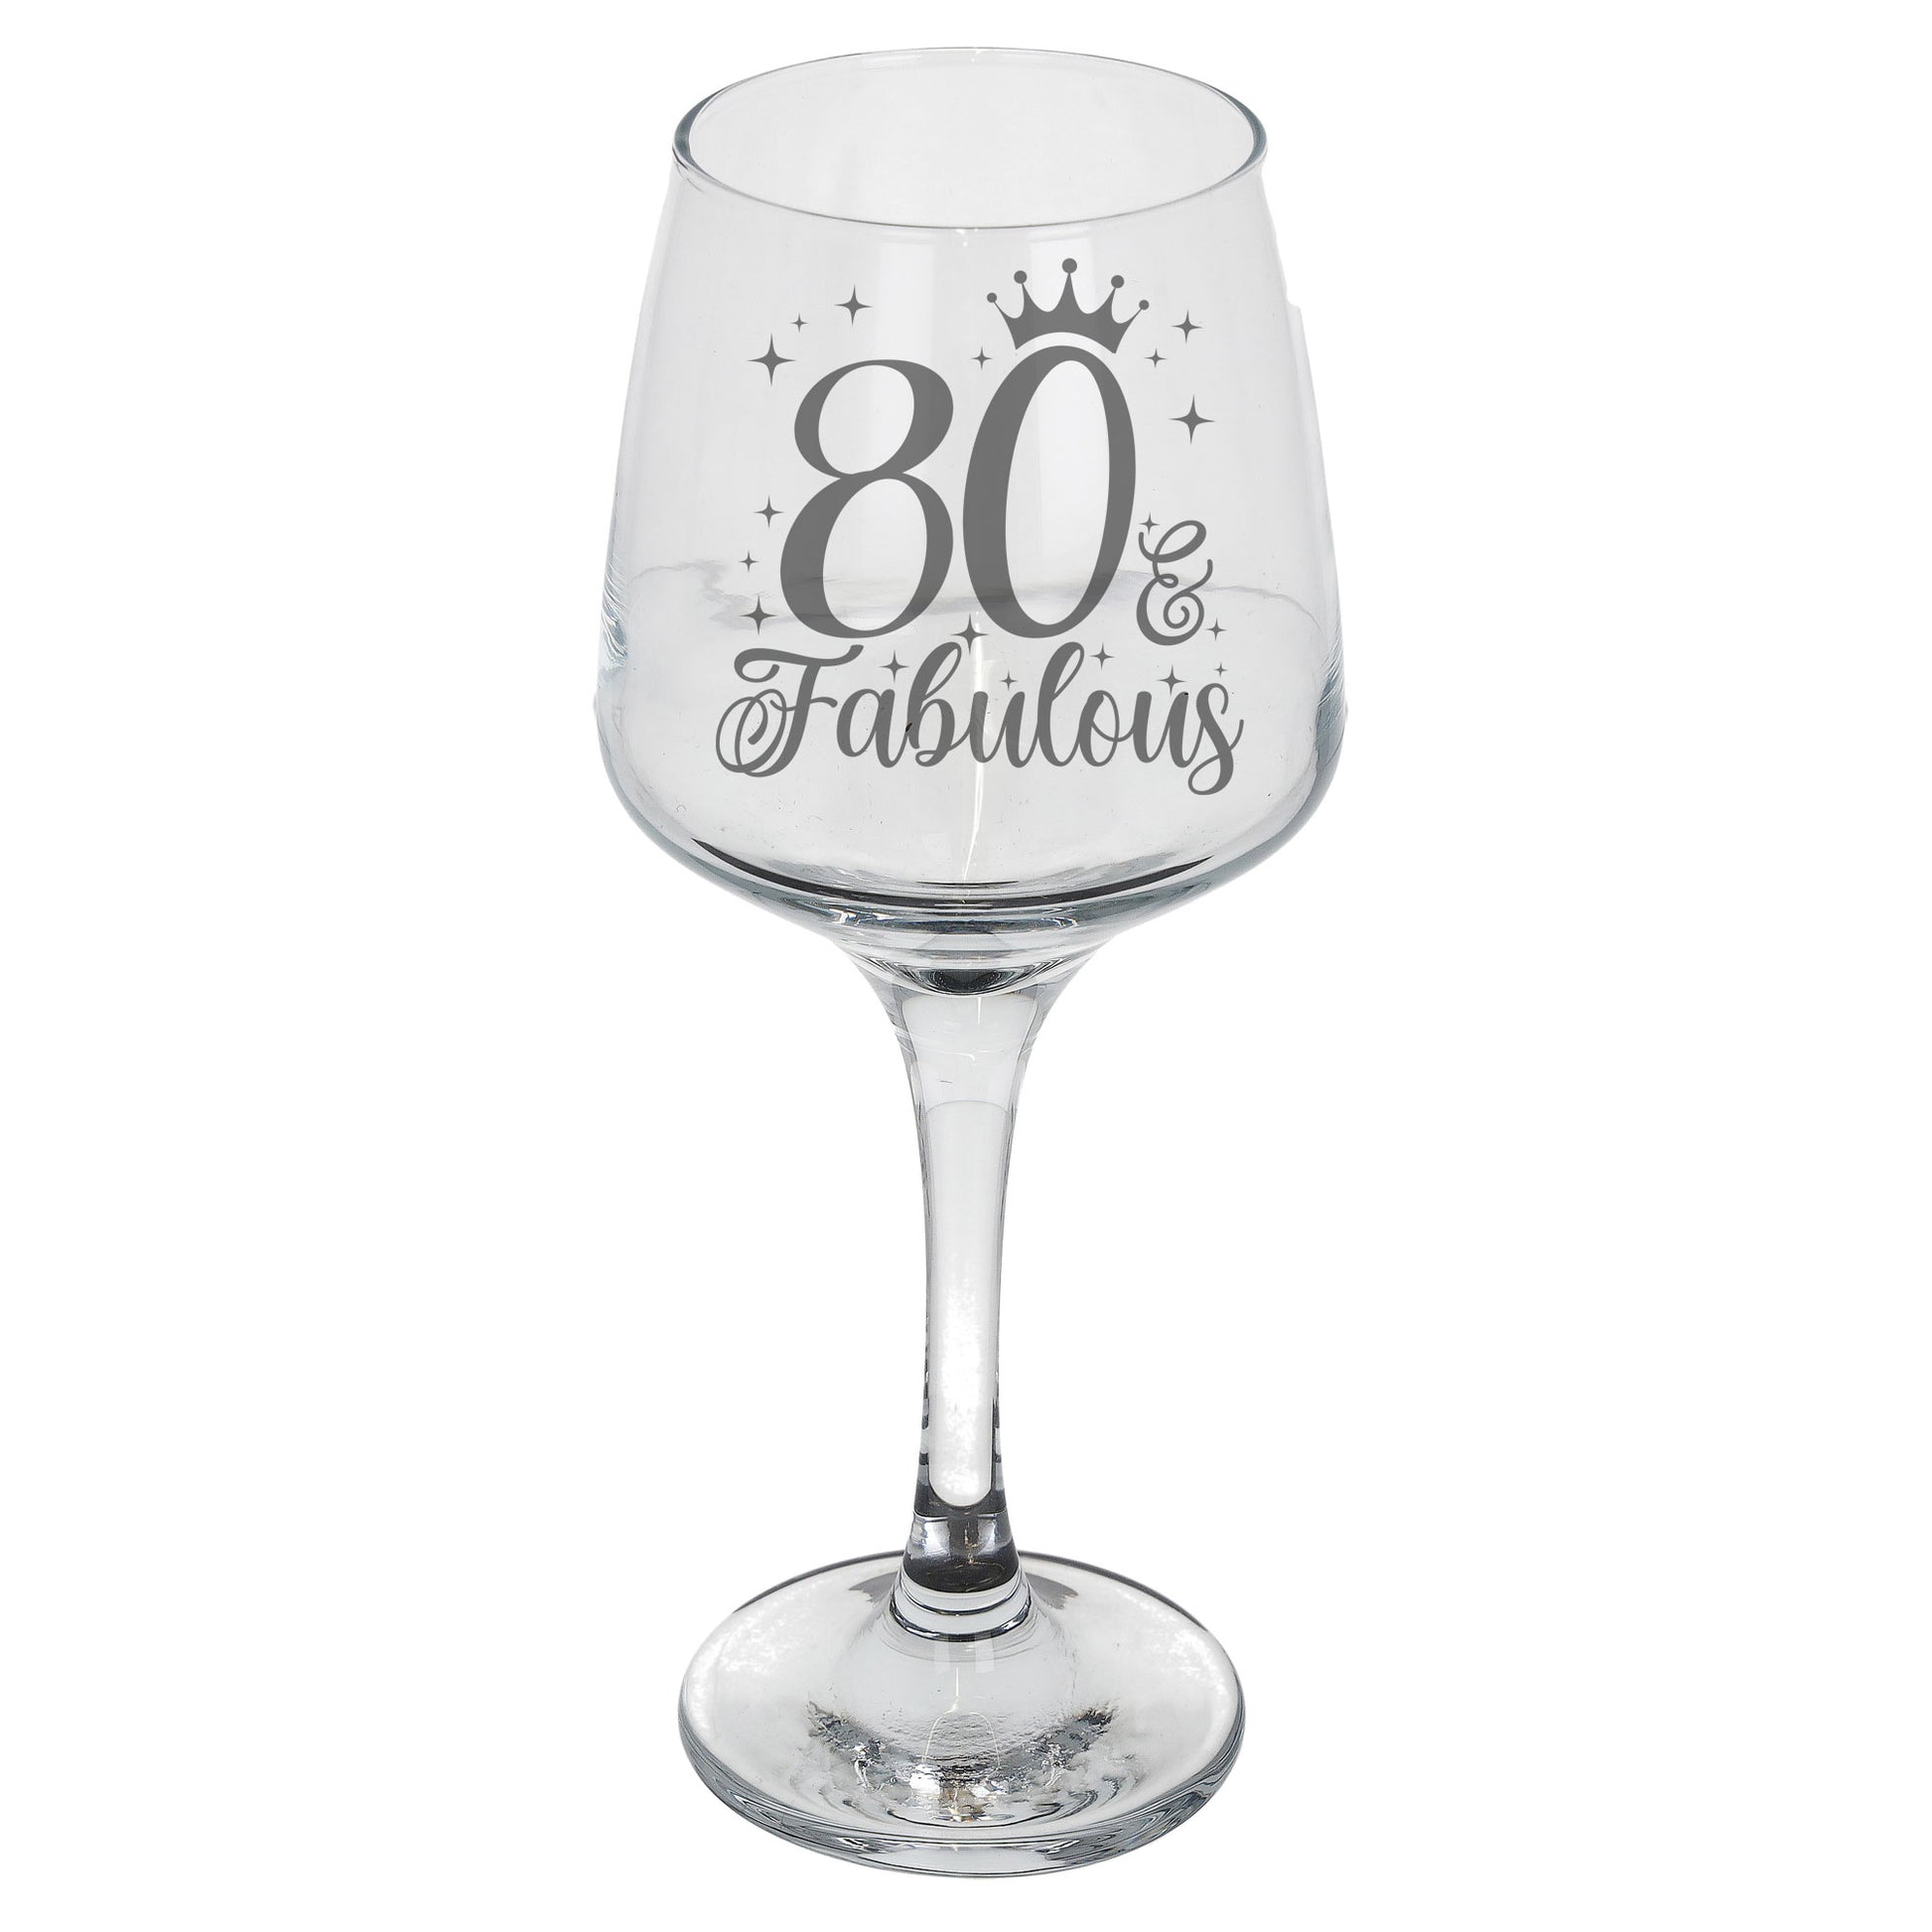 80 & Fabulous 80th Birthday Gift Engraved Wine Glass and/or Coaster Set  - Always Looking Good -   